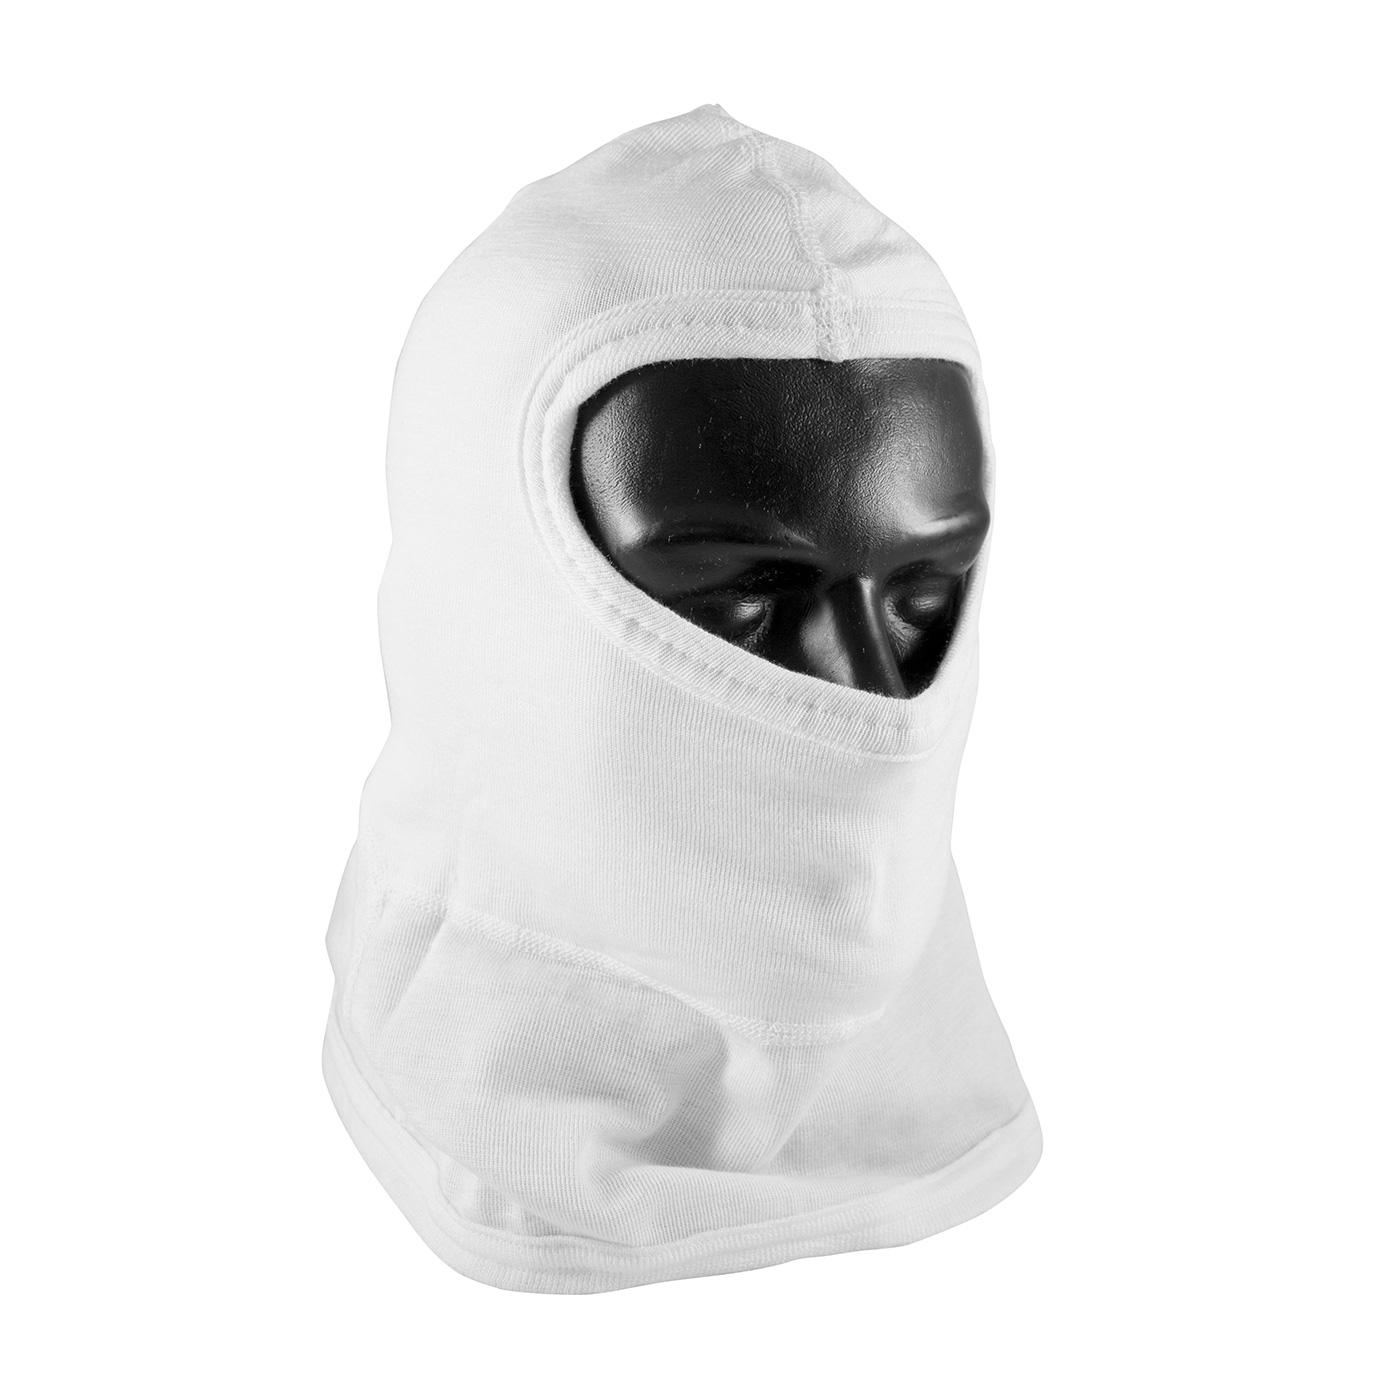 202-112 PIP® Double-Layer White Nomex® Balaclava with bib - Full Face